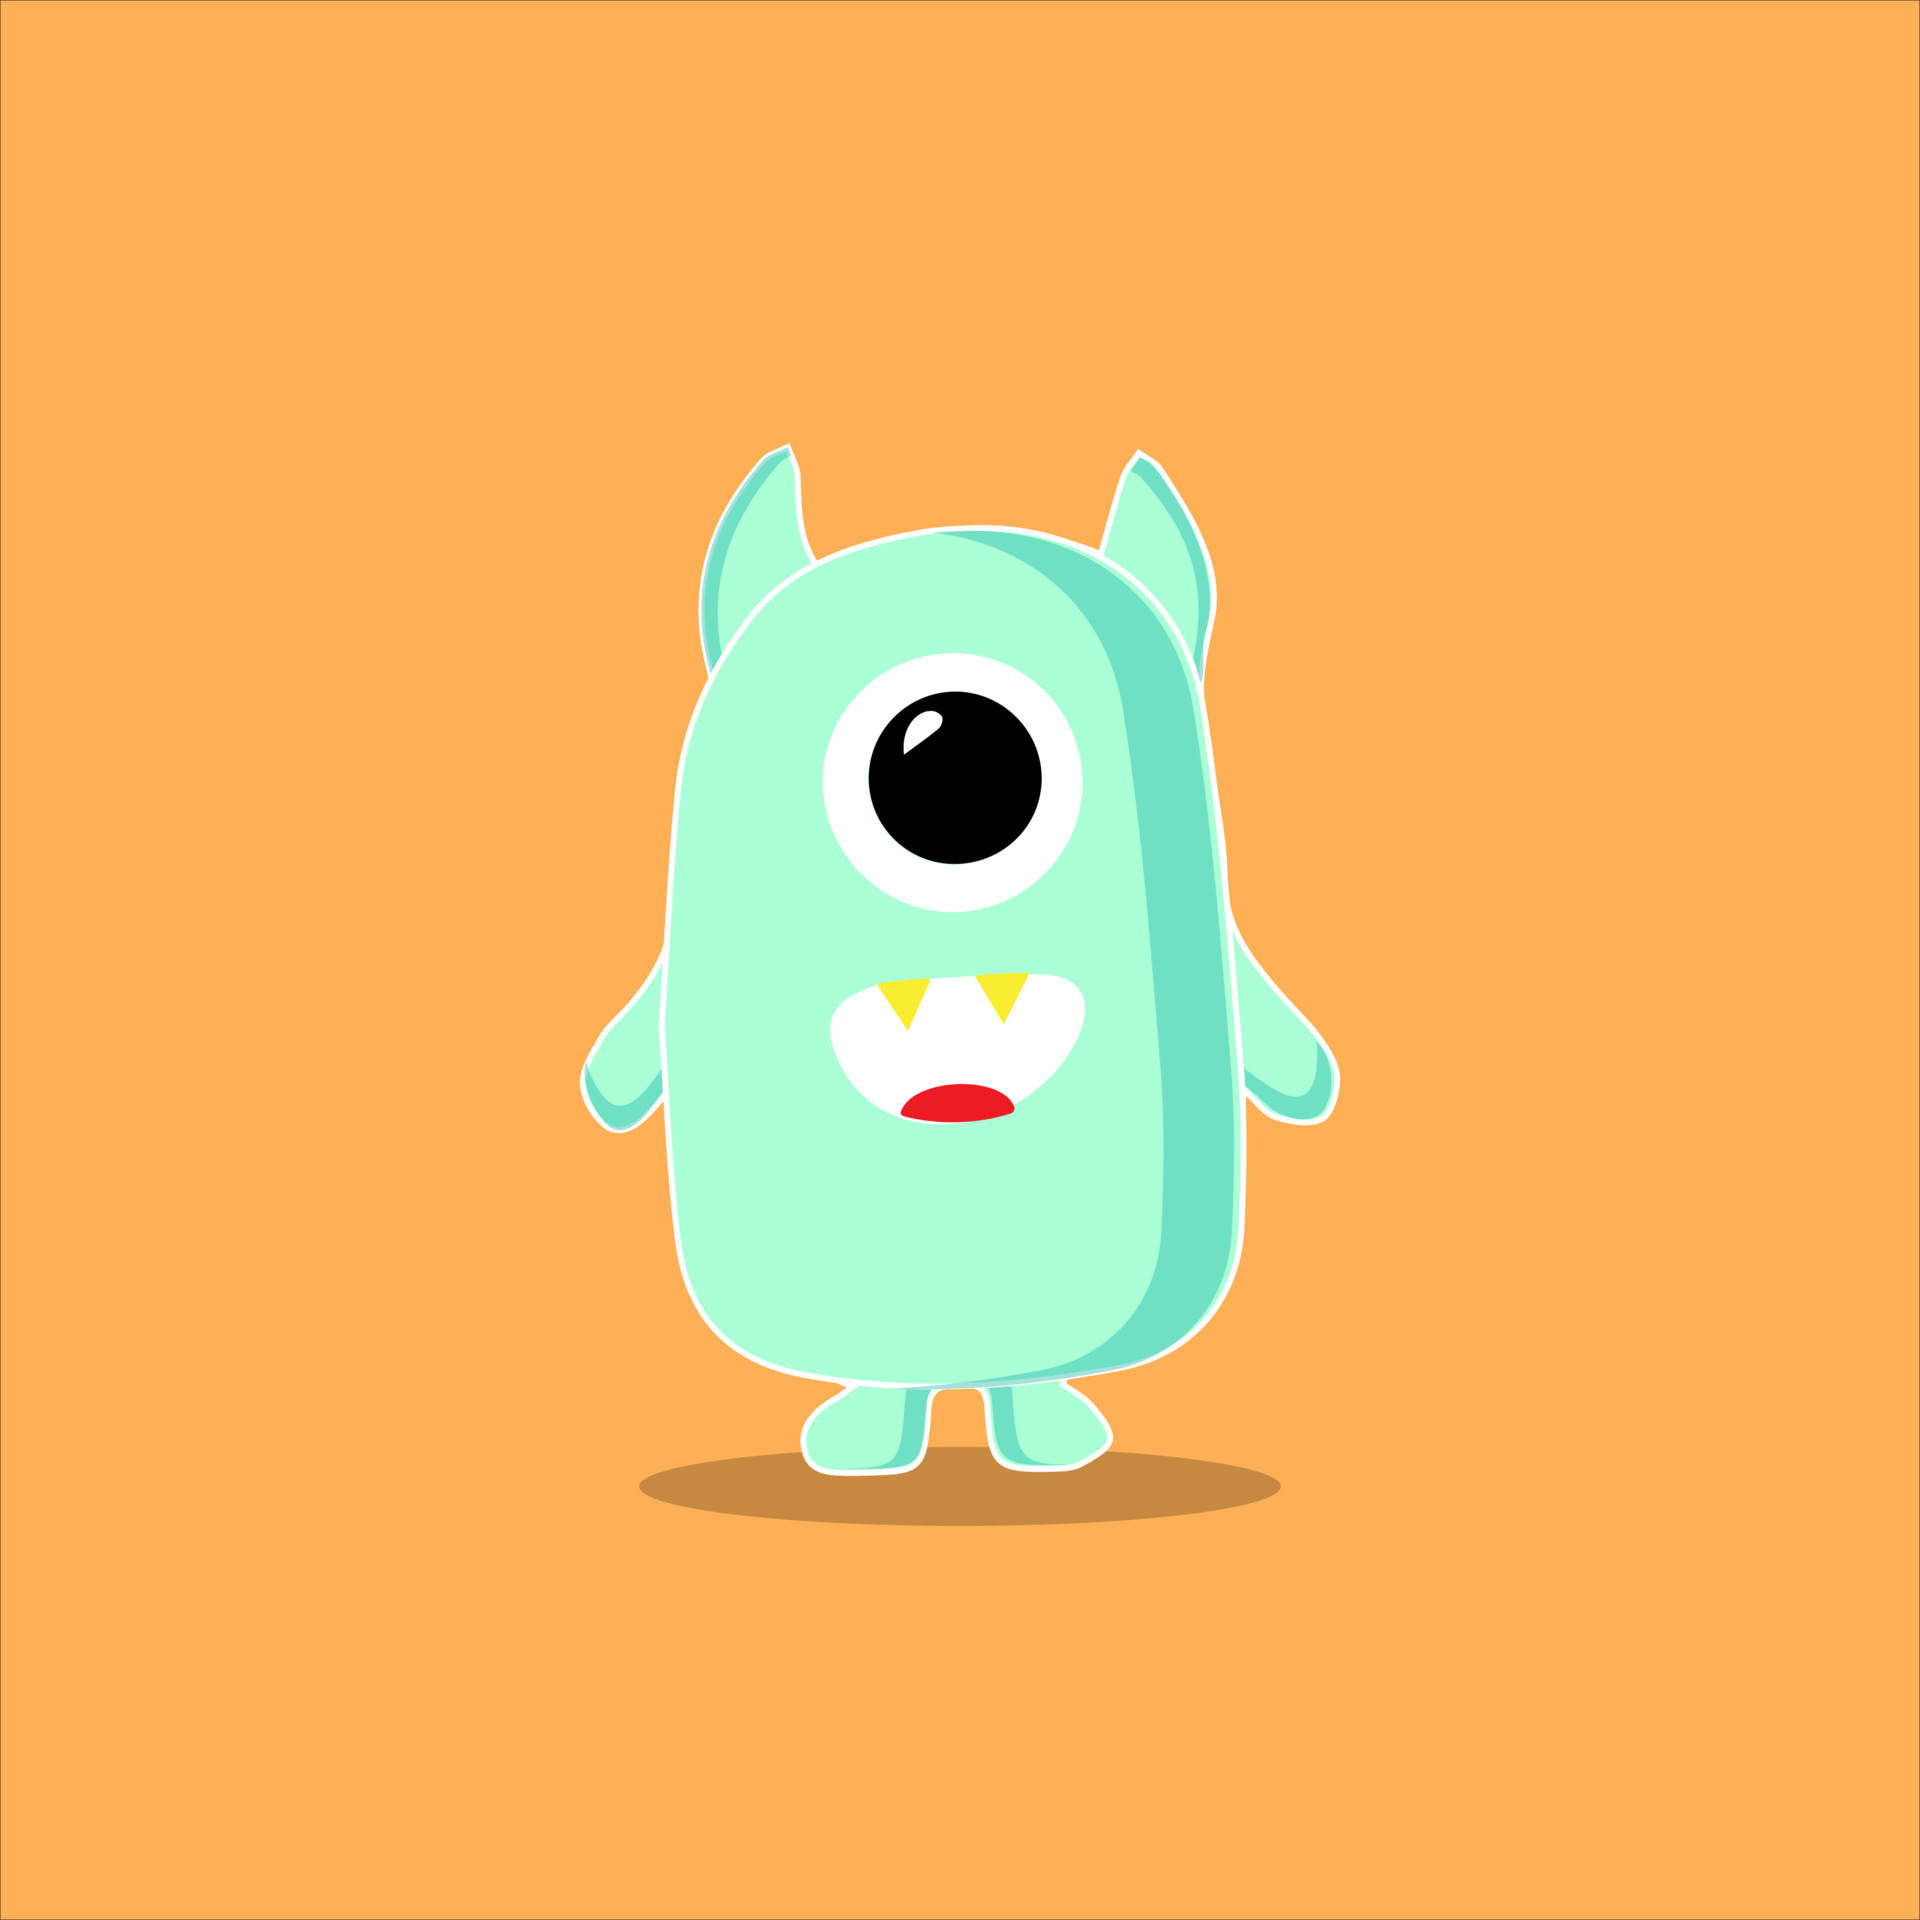 Cute Cartoon Monsters Character Monsters In Flat Style Vector Vector Illustration 13317312